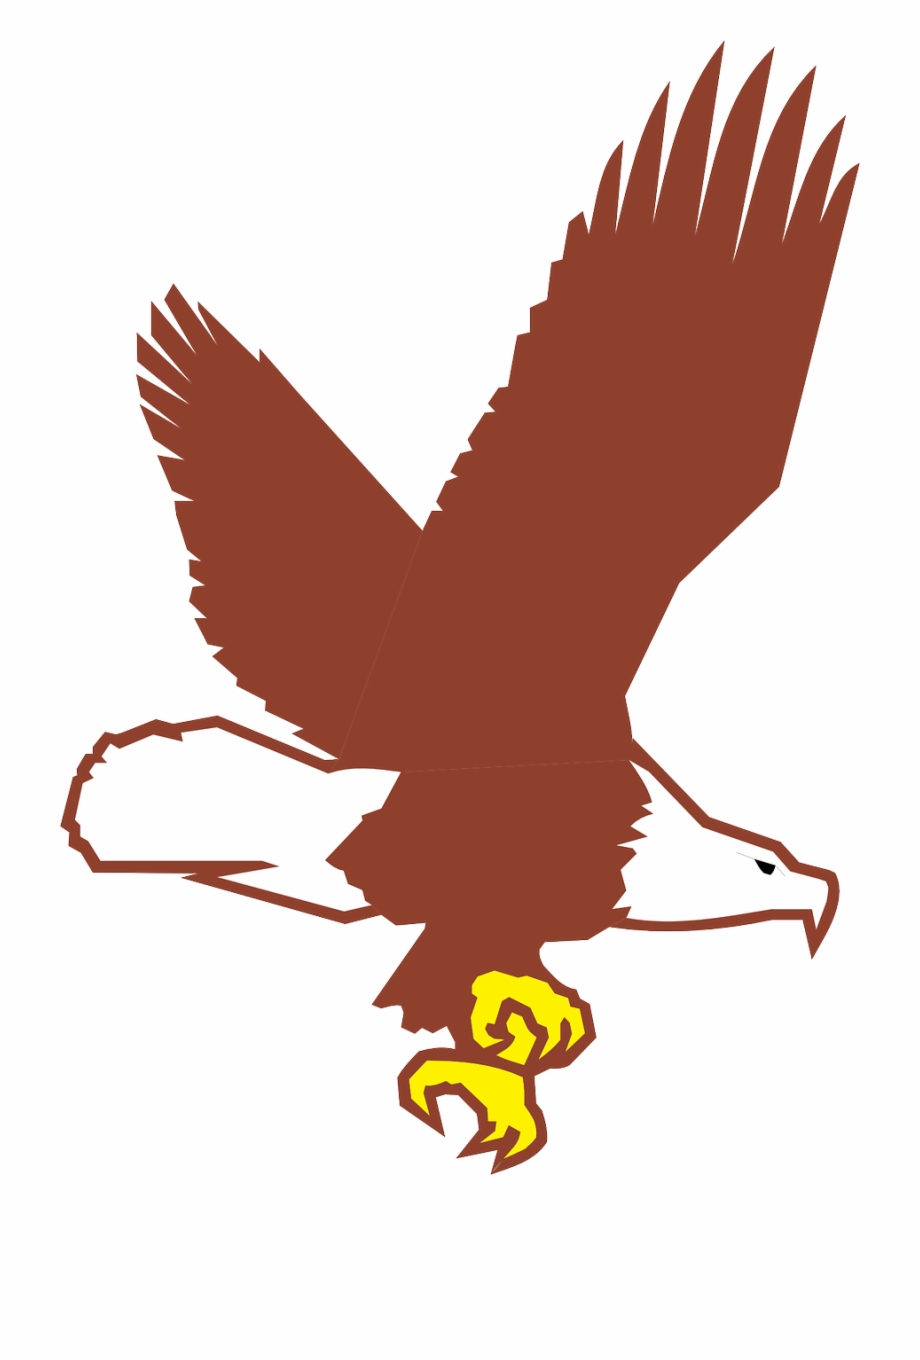 Free Eagle Vector Png, Download Free Eagle Vector Png png images, Free